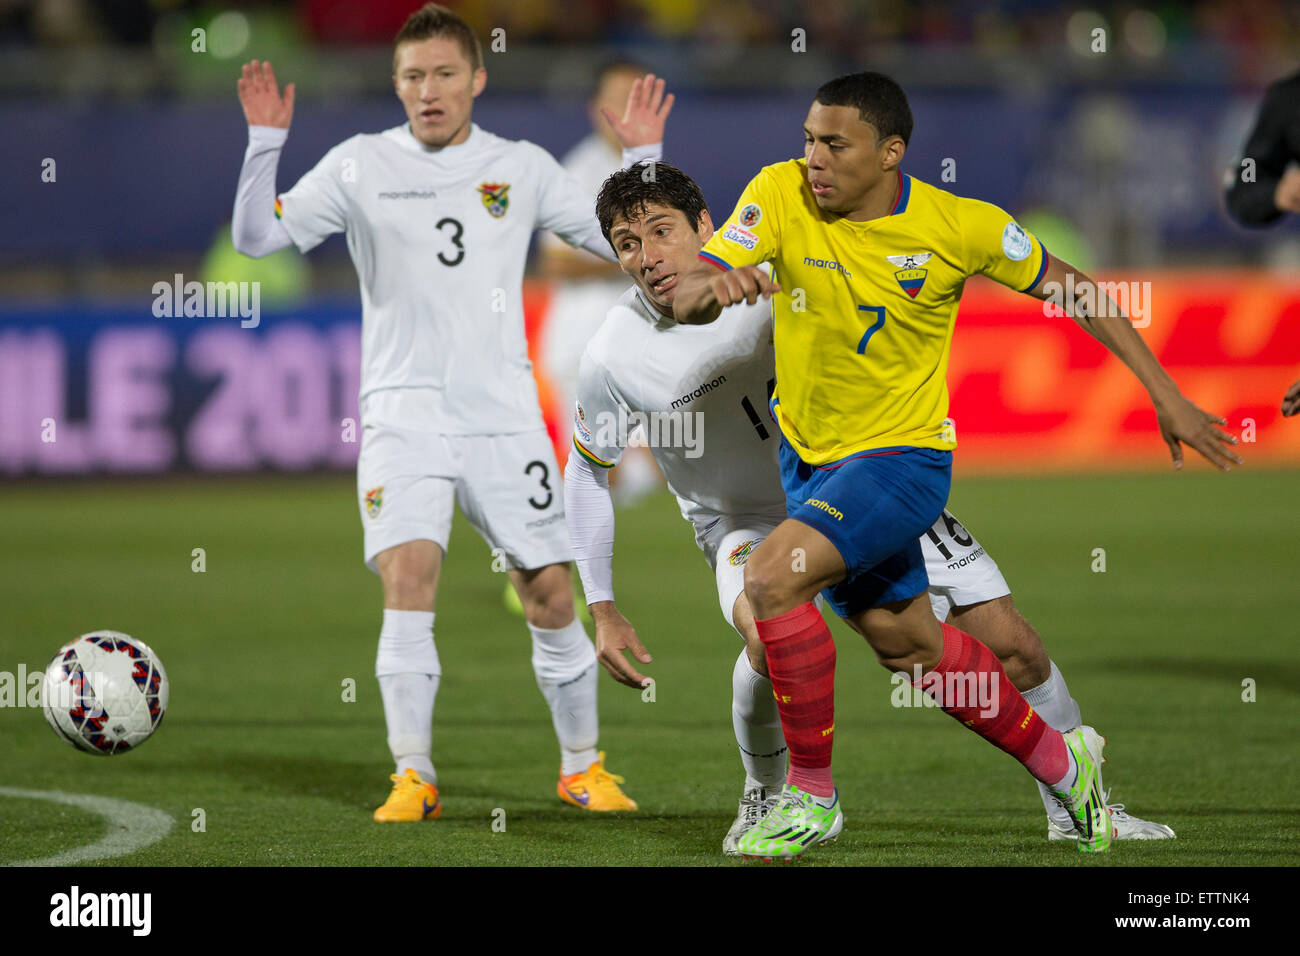 Valparaiso, Chile. 15th June, 2015. Jefferson Montero (R) of Ecuador vies for the ball with Ronald Raldes (C) of Bolivia during the Group A match of the Copa America, held at the Elias Figueroa Brander stadium, in Valparaiso, Chile, on June 15, 2015. Bolivia won 3-2. © Luis Echeverria/Xinhua/Alamy Live News Stock Photo